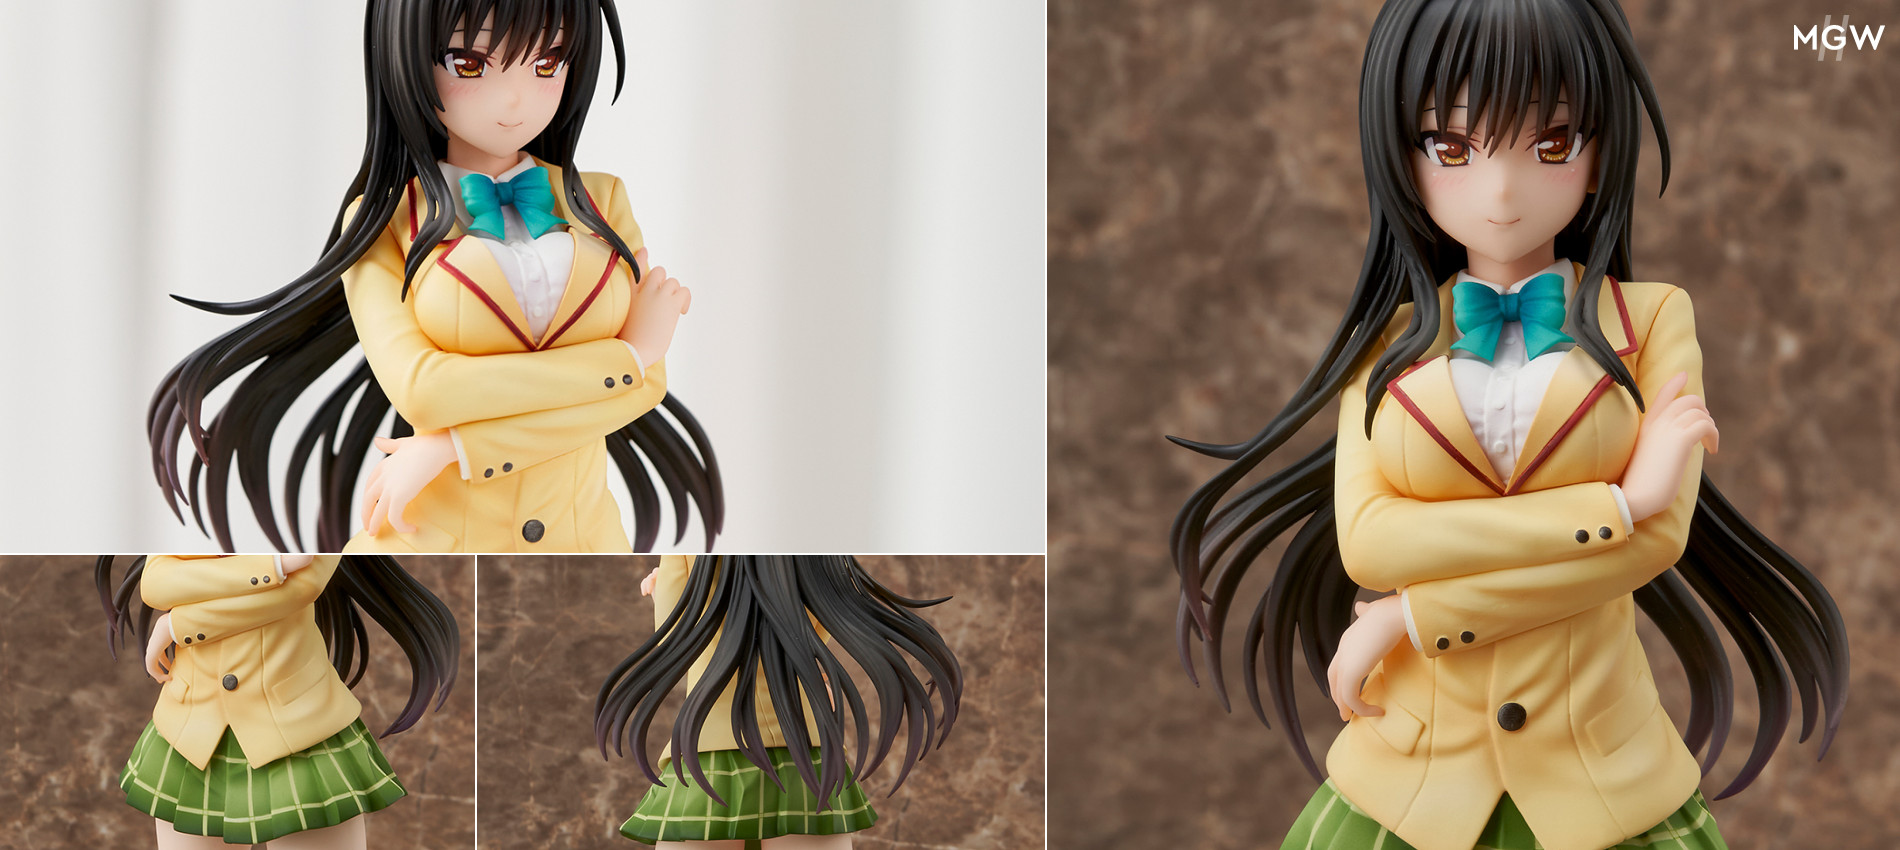 Kotegawa Yui Limited ver. by Union Creative from To LOVE Ru Darkness